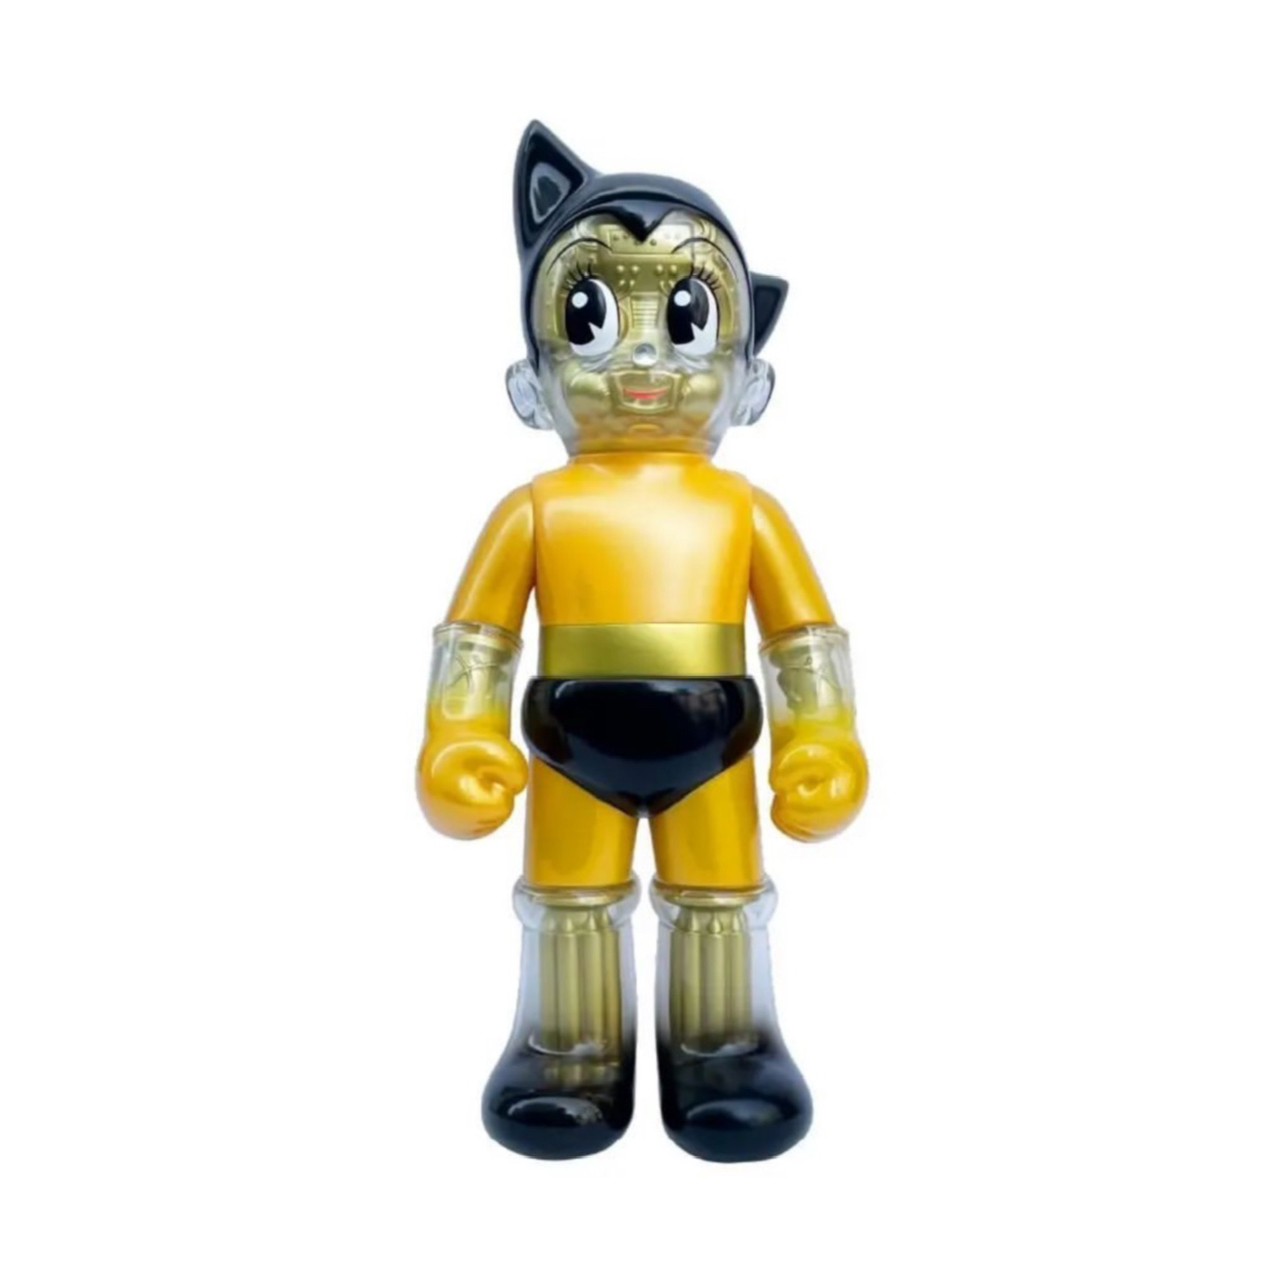 Middle Scale Astro Boy 鉄腕アトム GOLD Ver. - SECRET BASE ONLINE STORE